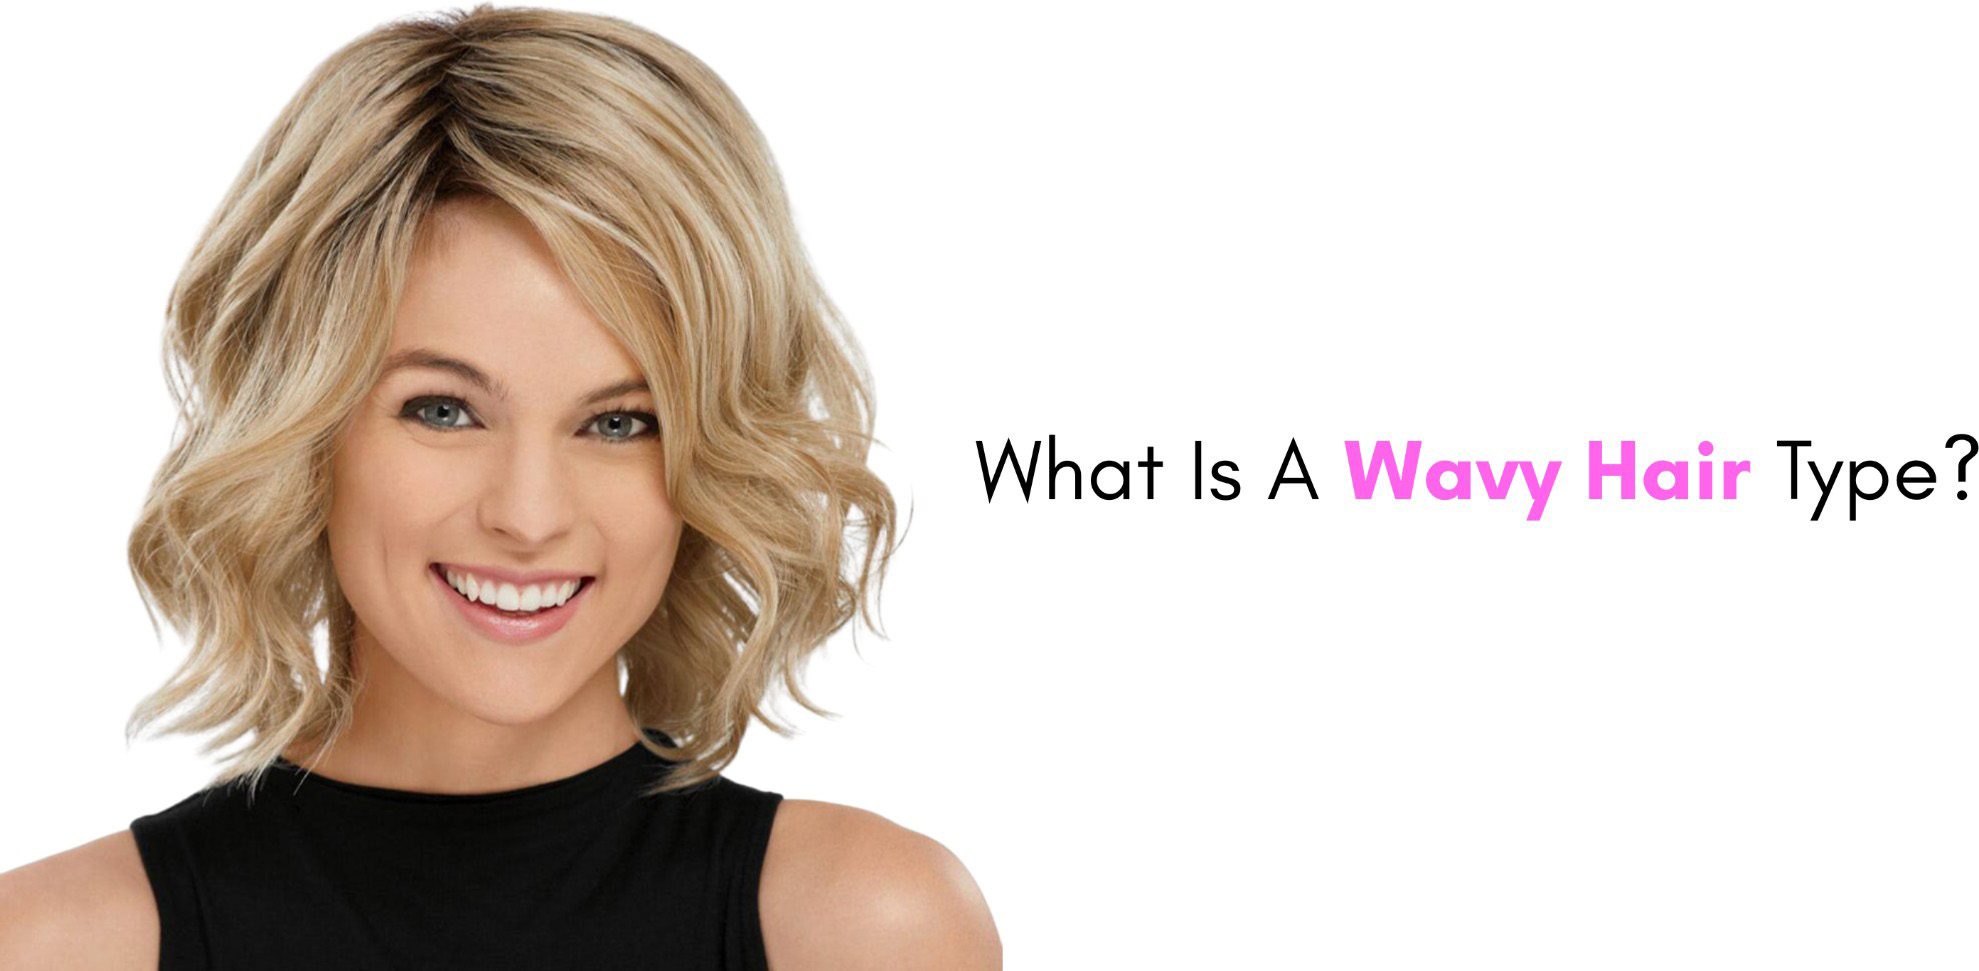 What Is A Wavy Hair Type?